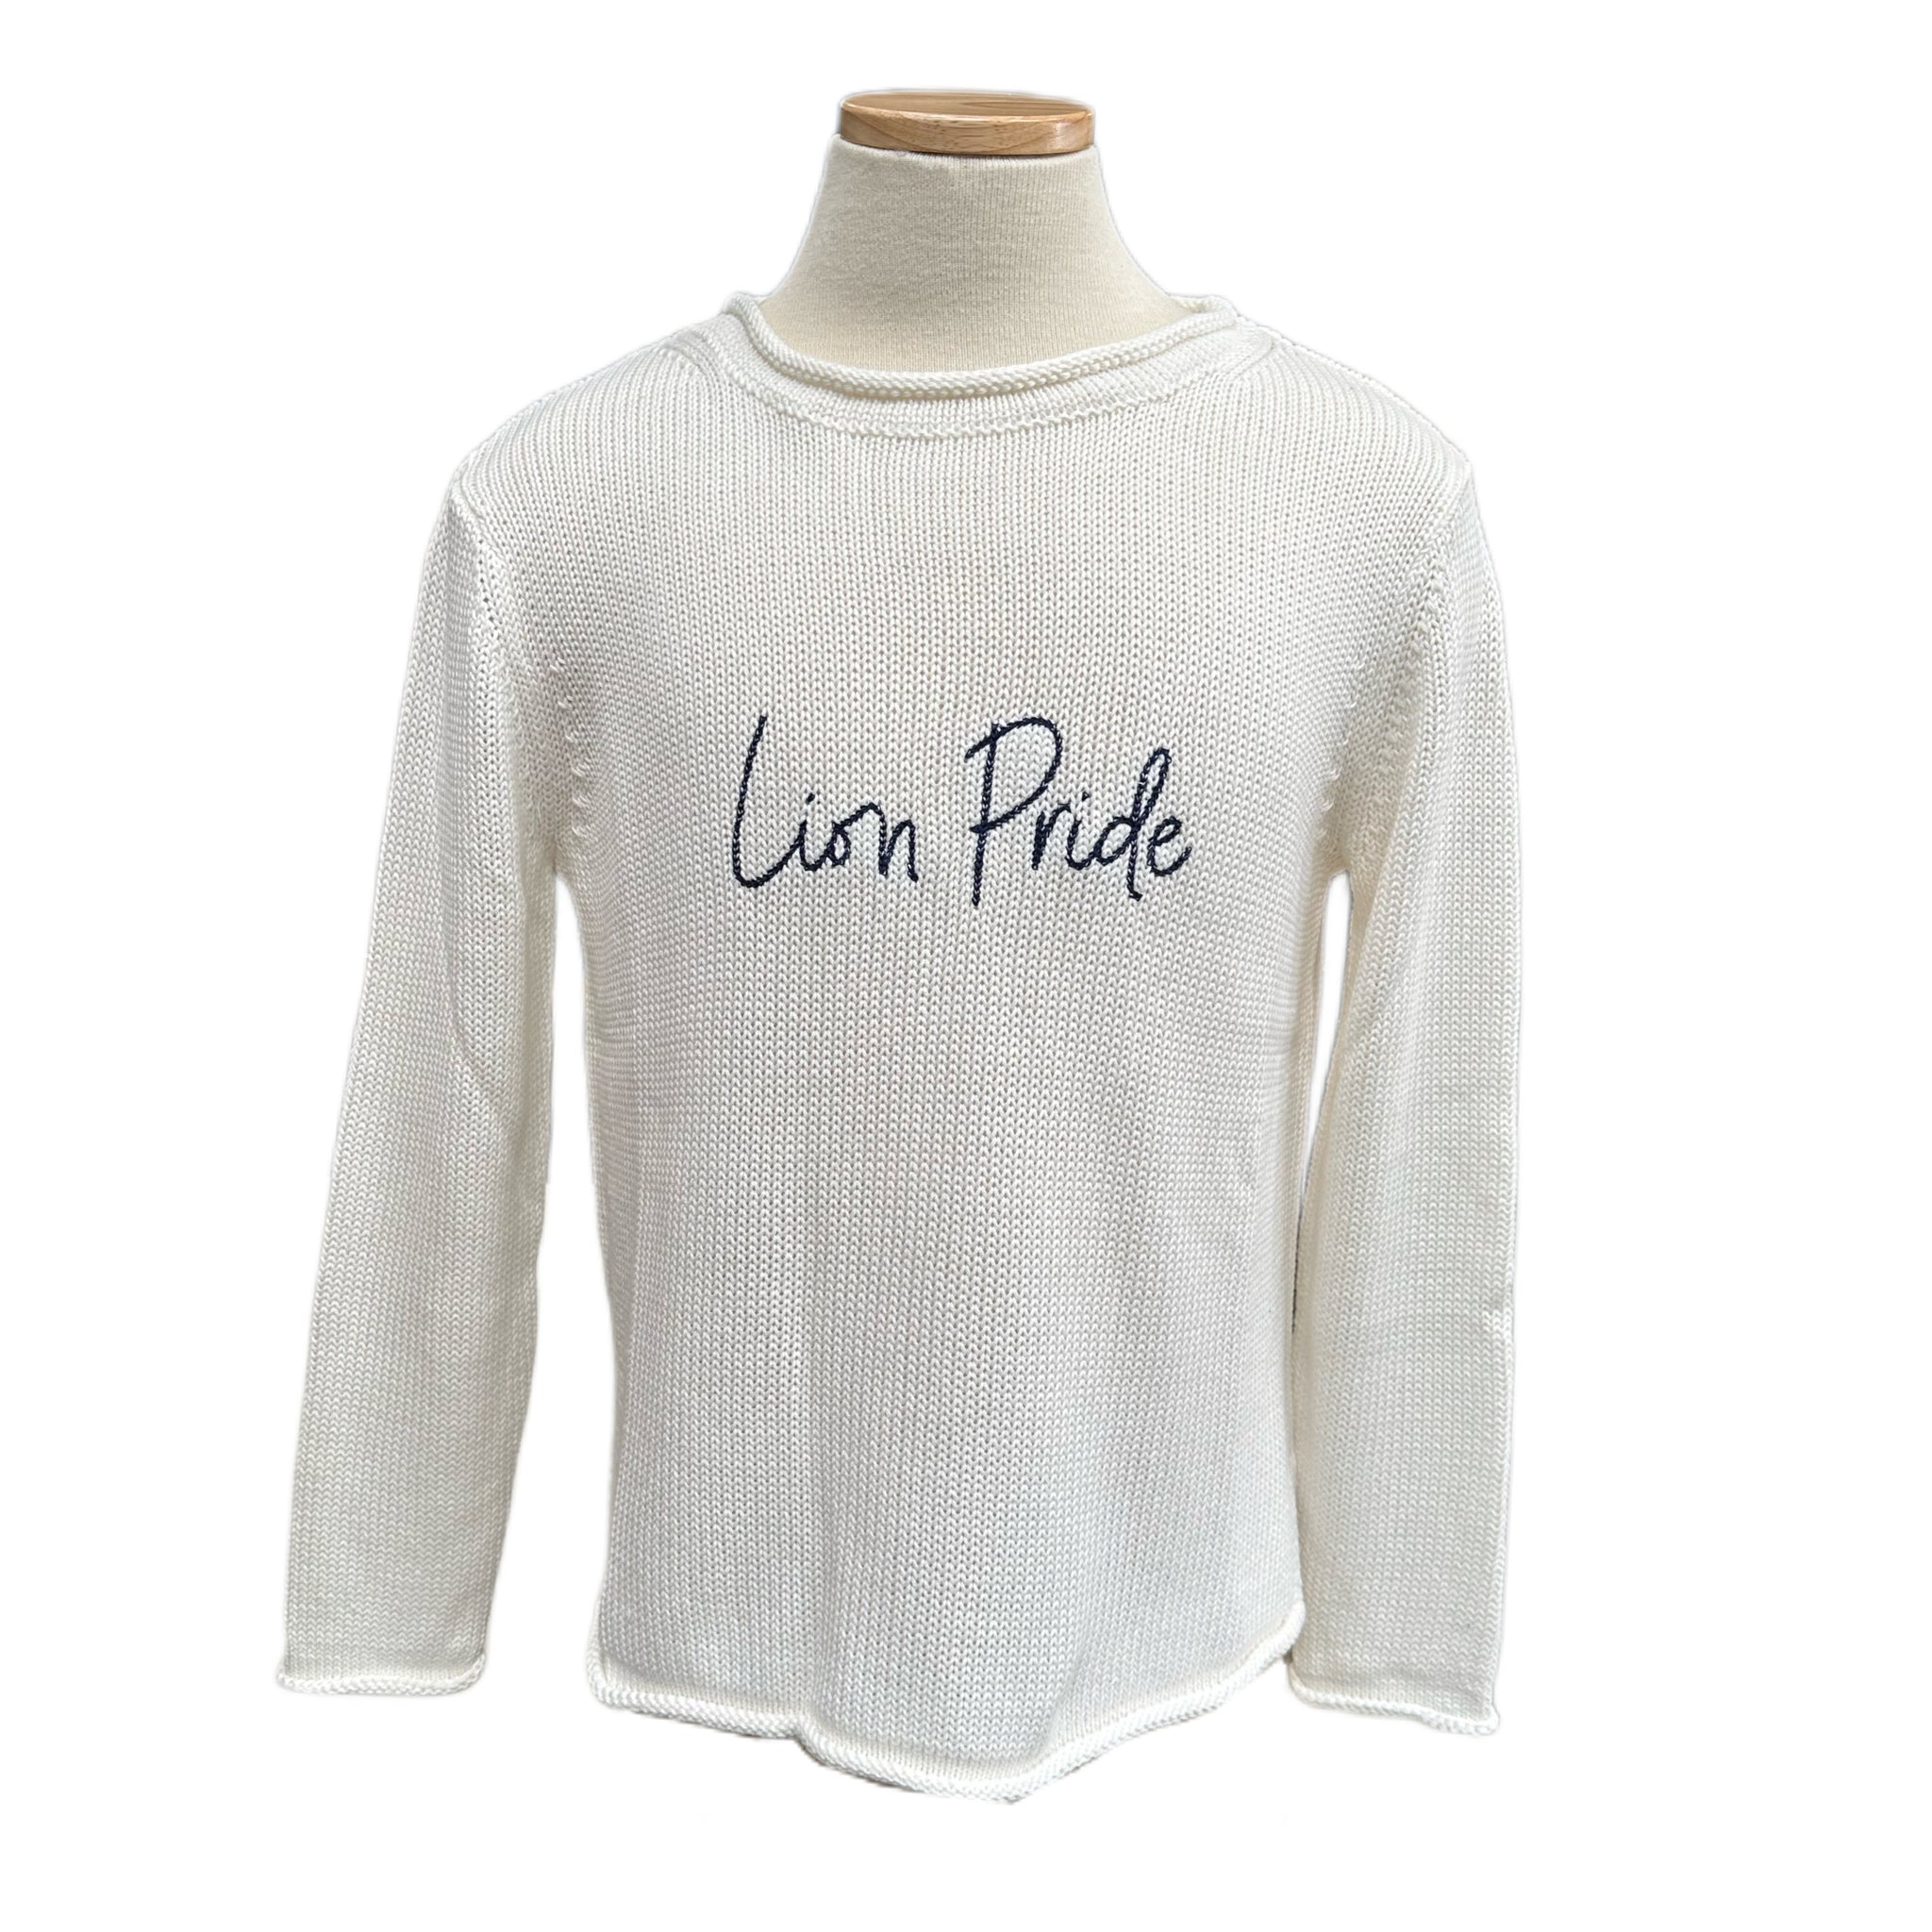 Lion Pride Mid Knit Sweater